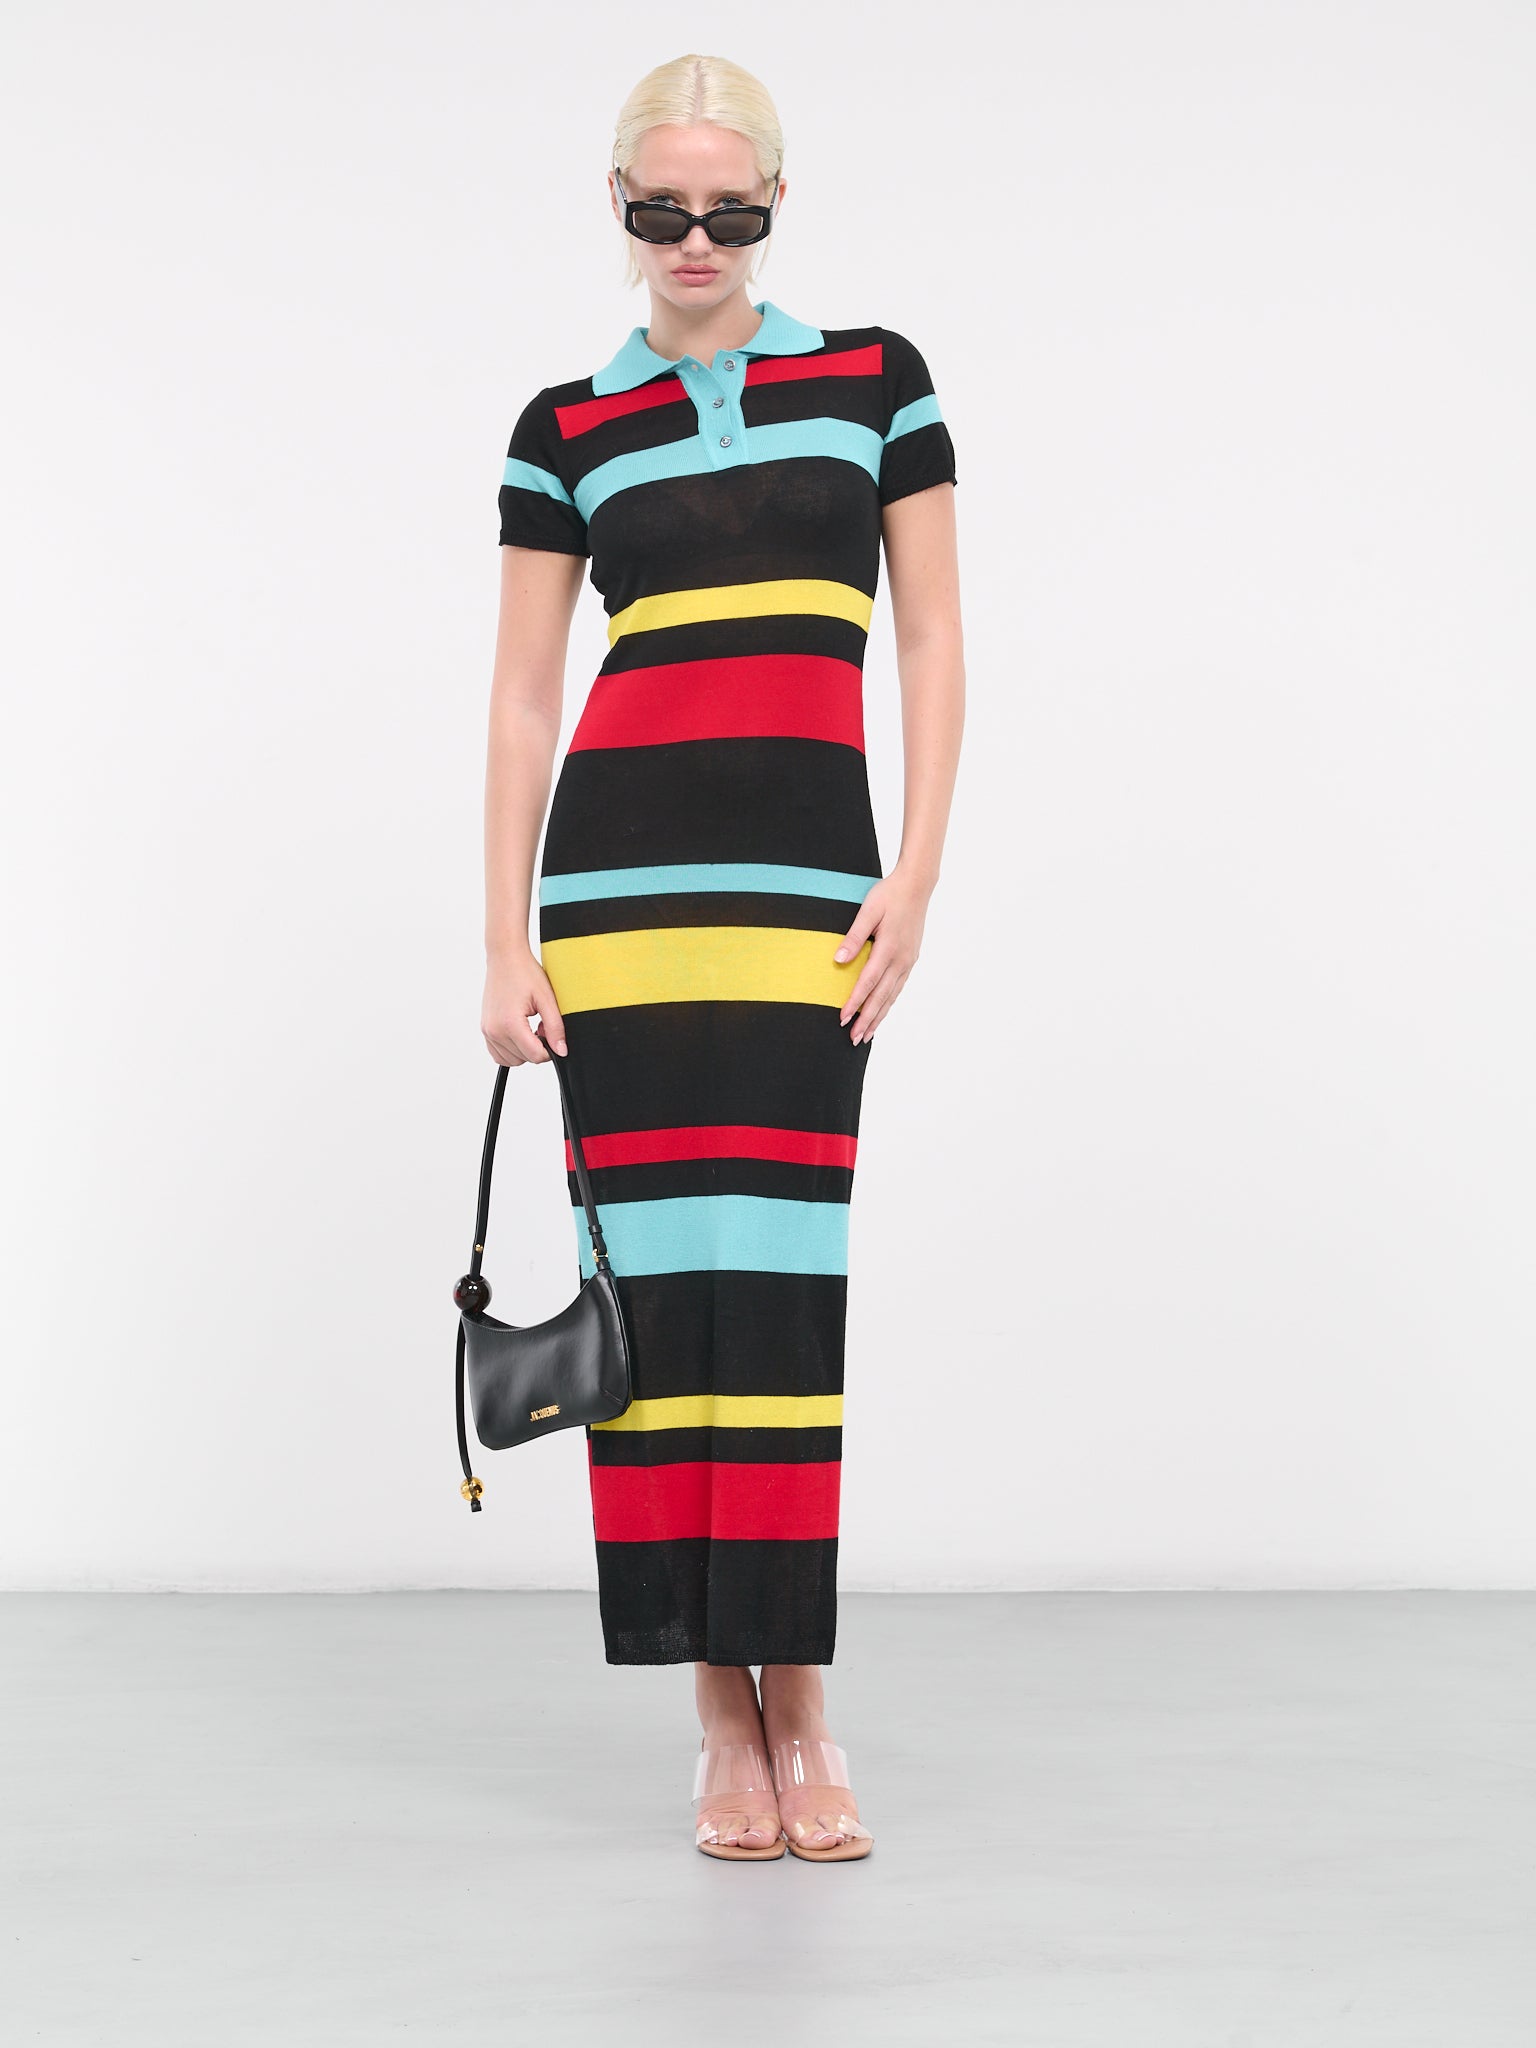 Polo Dress (4131-3998-GREEN-BLACK-RED-YELL)